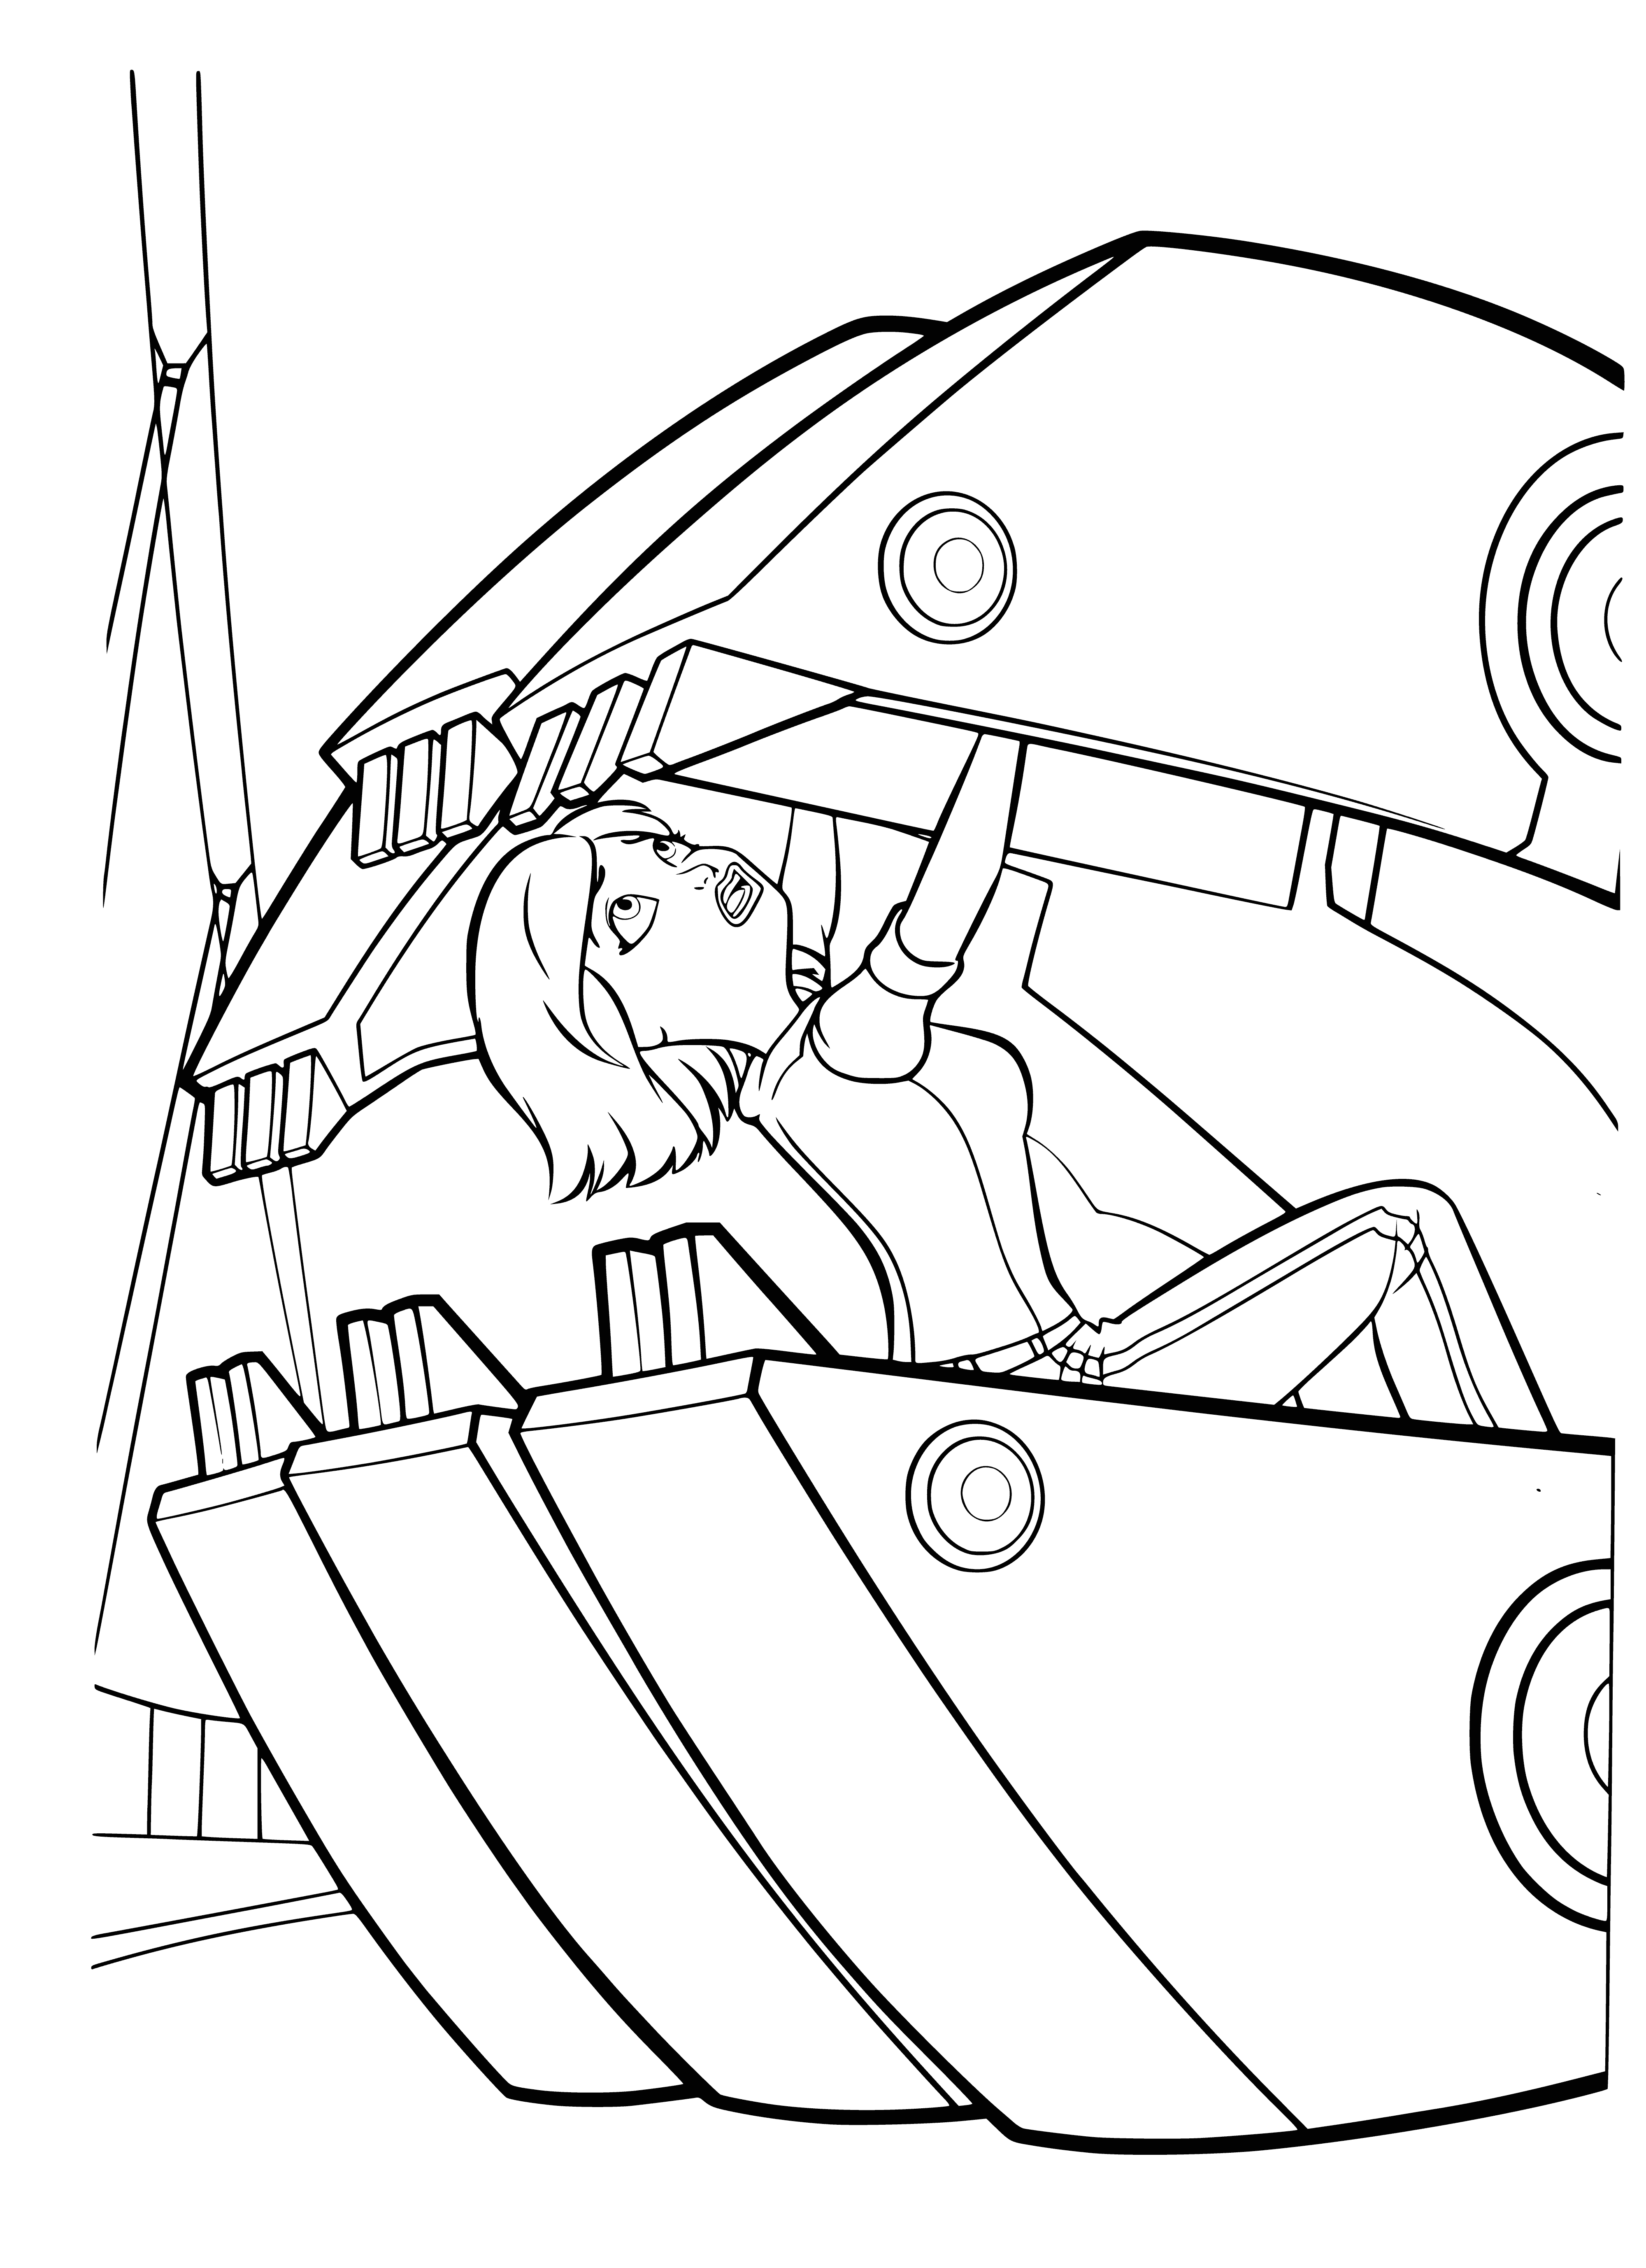 coloring page: Group rushes to save woman from giant green creature with tentacles that pulls her into its mouth.